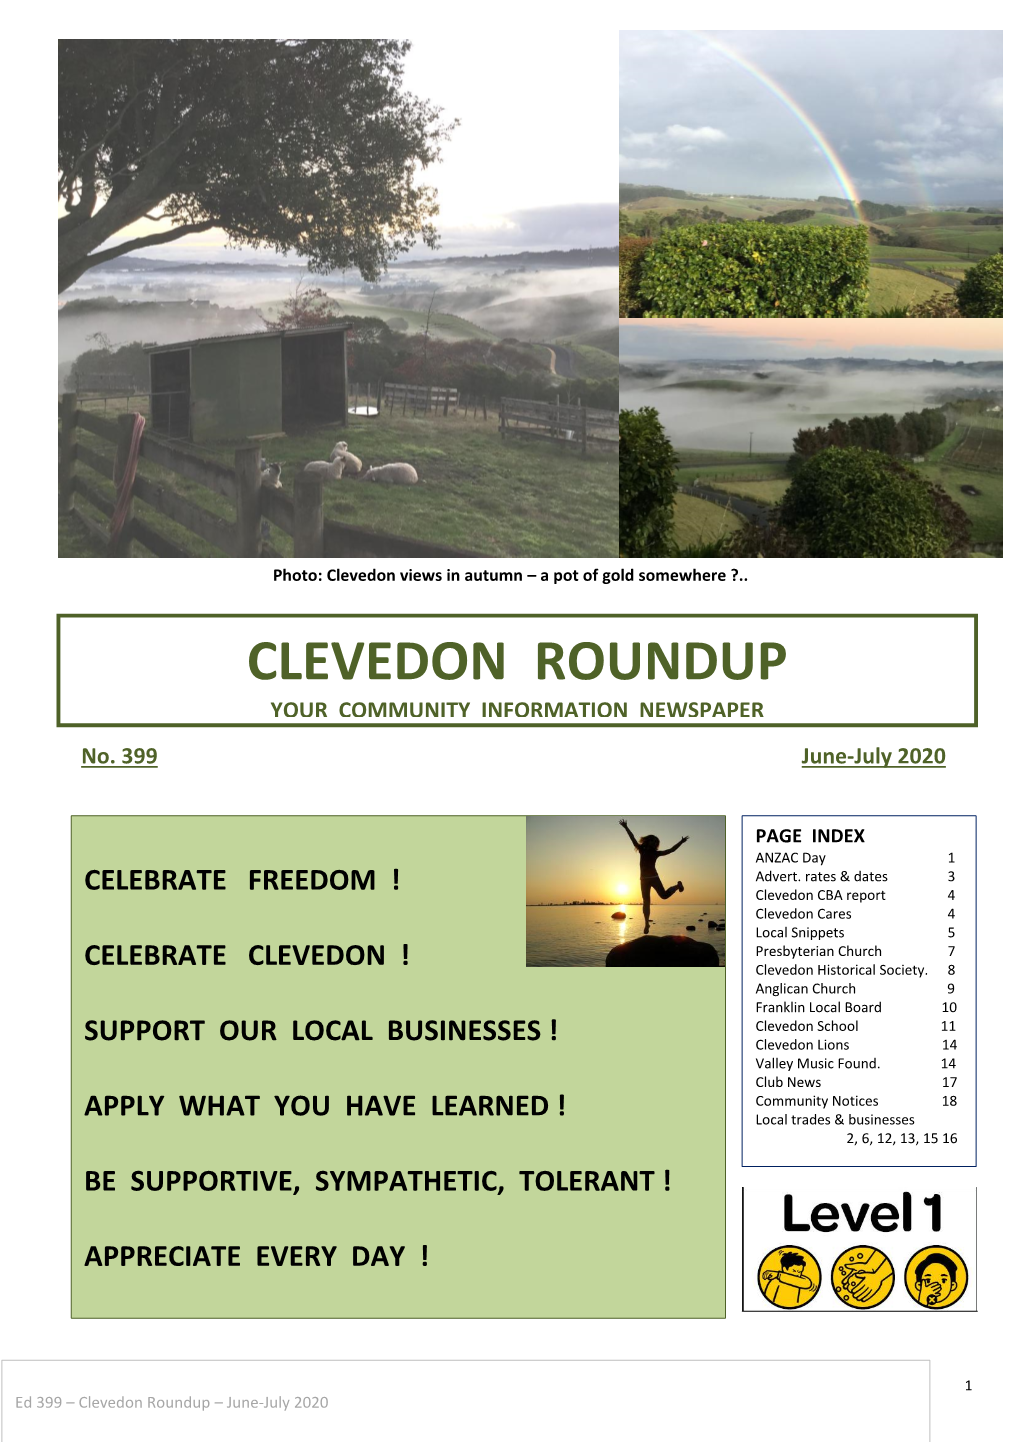 Clevedon Roundup Your Community Information Newspaper